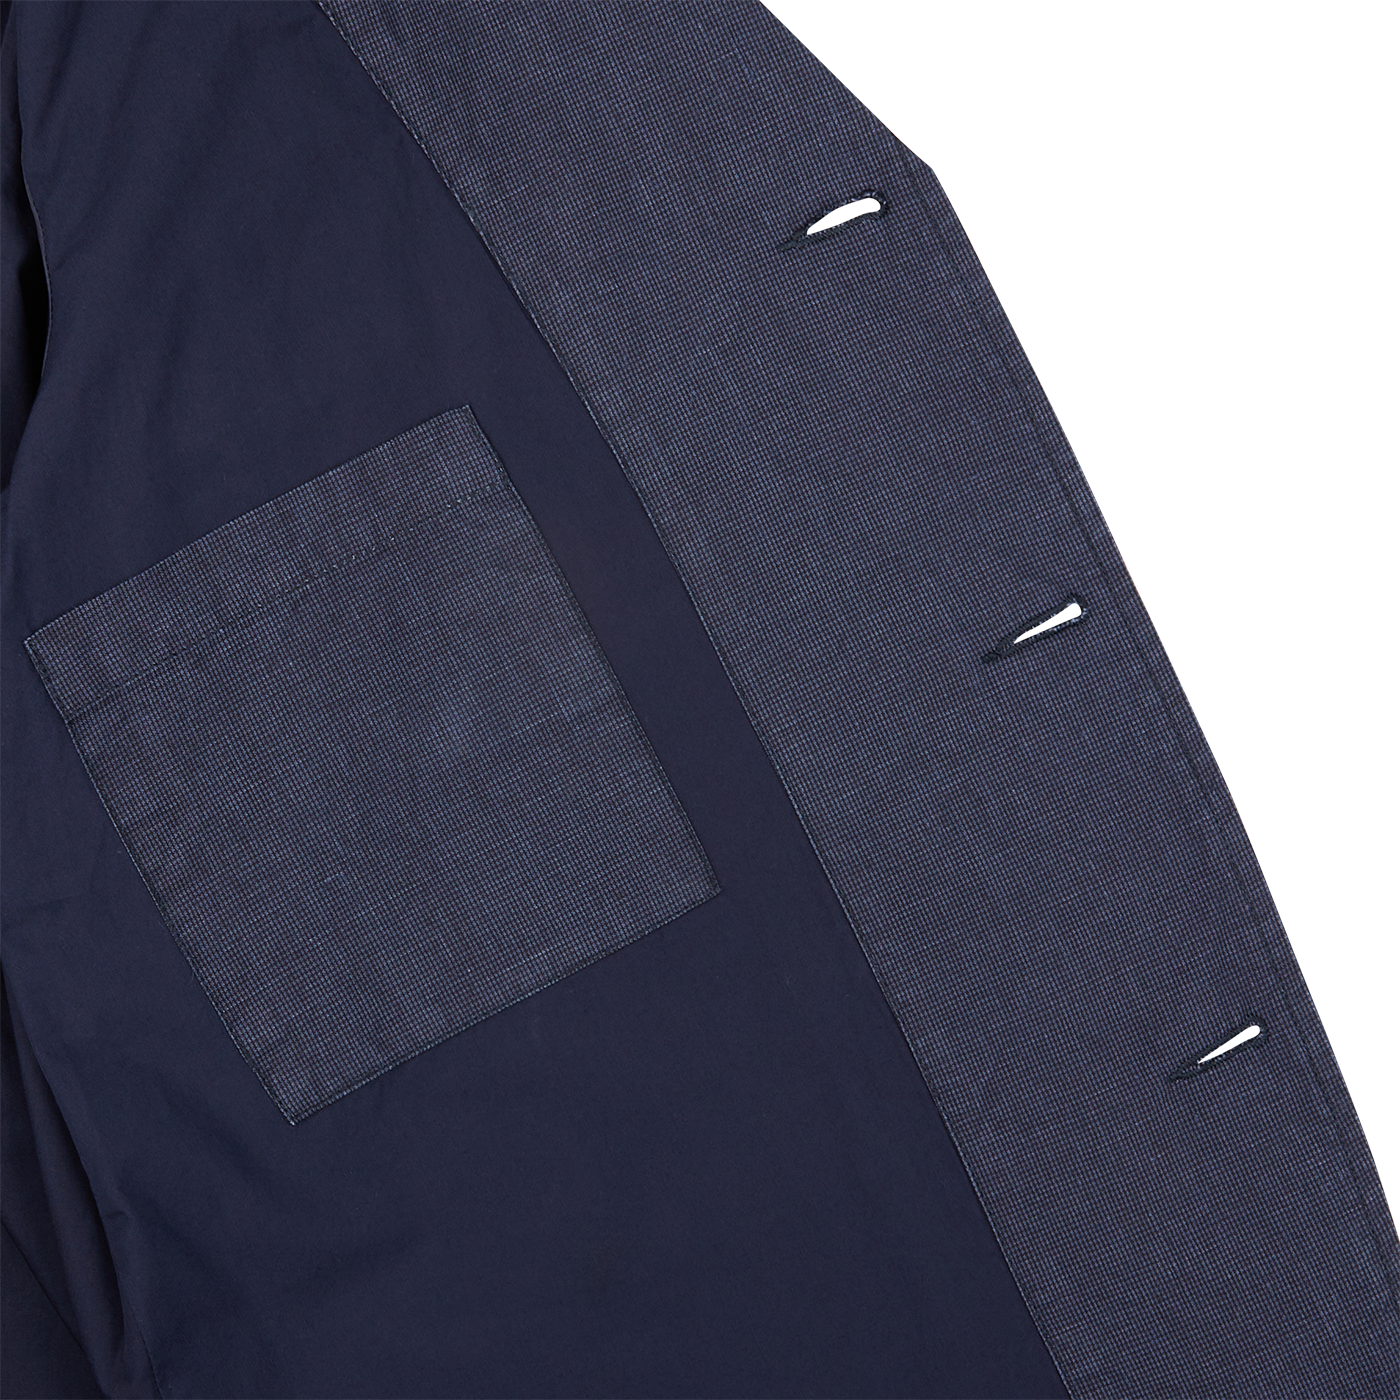 The back of a navy blue Universal Works Navy Puppytooth Linen Cotton 3-Button Jacket with two pockets.